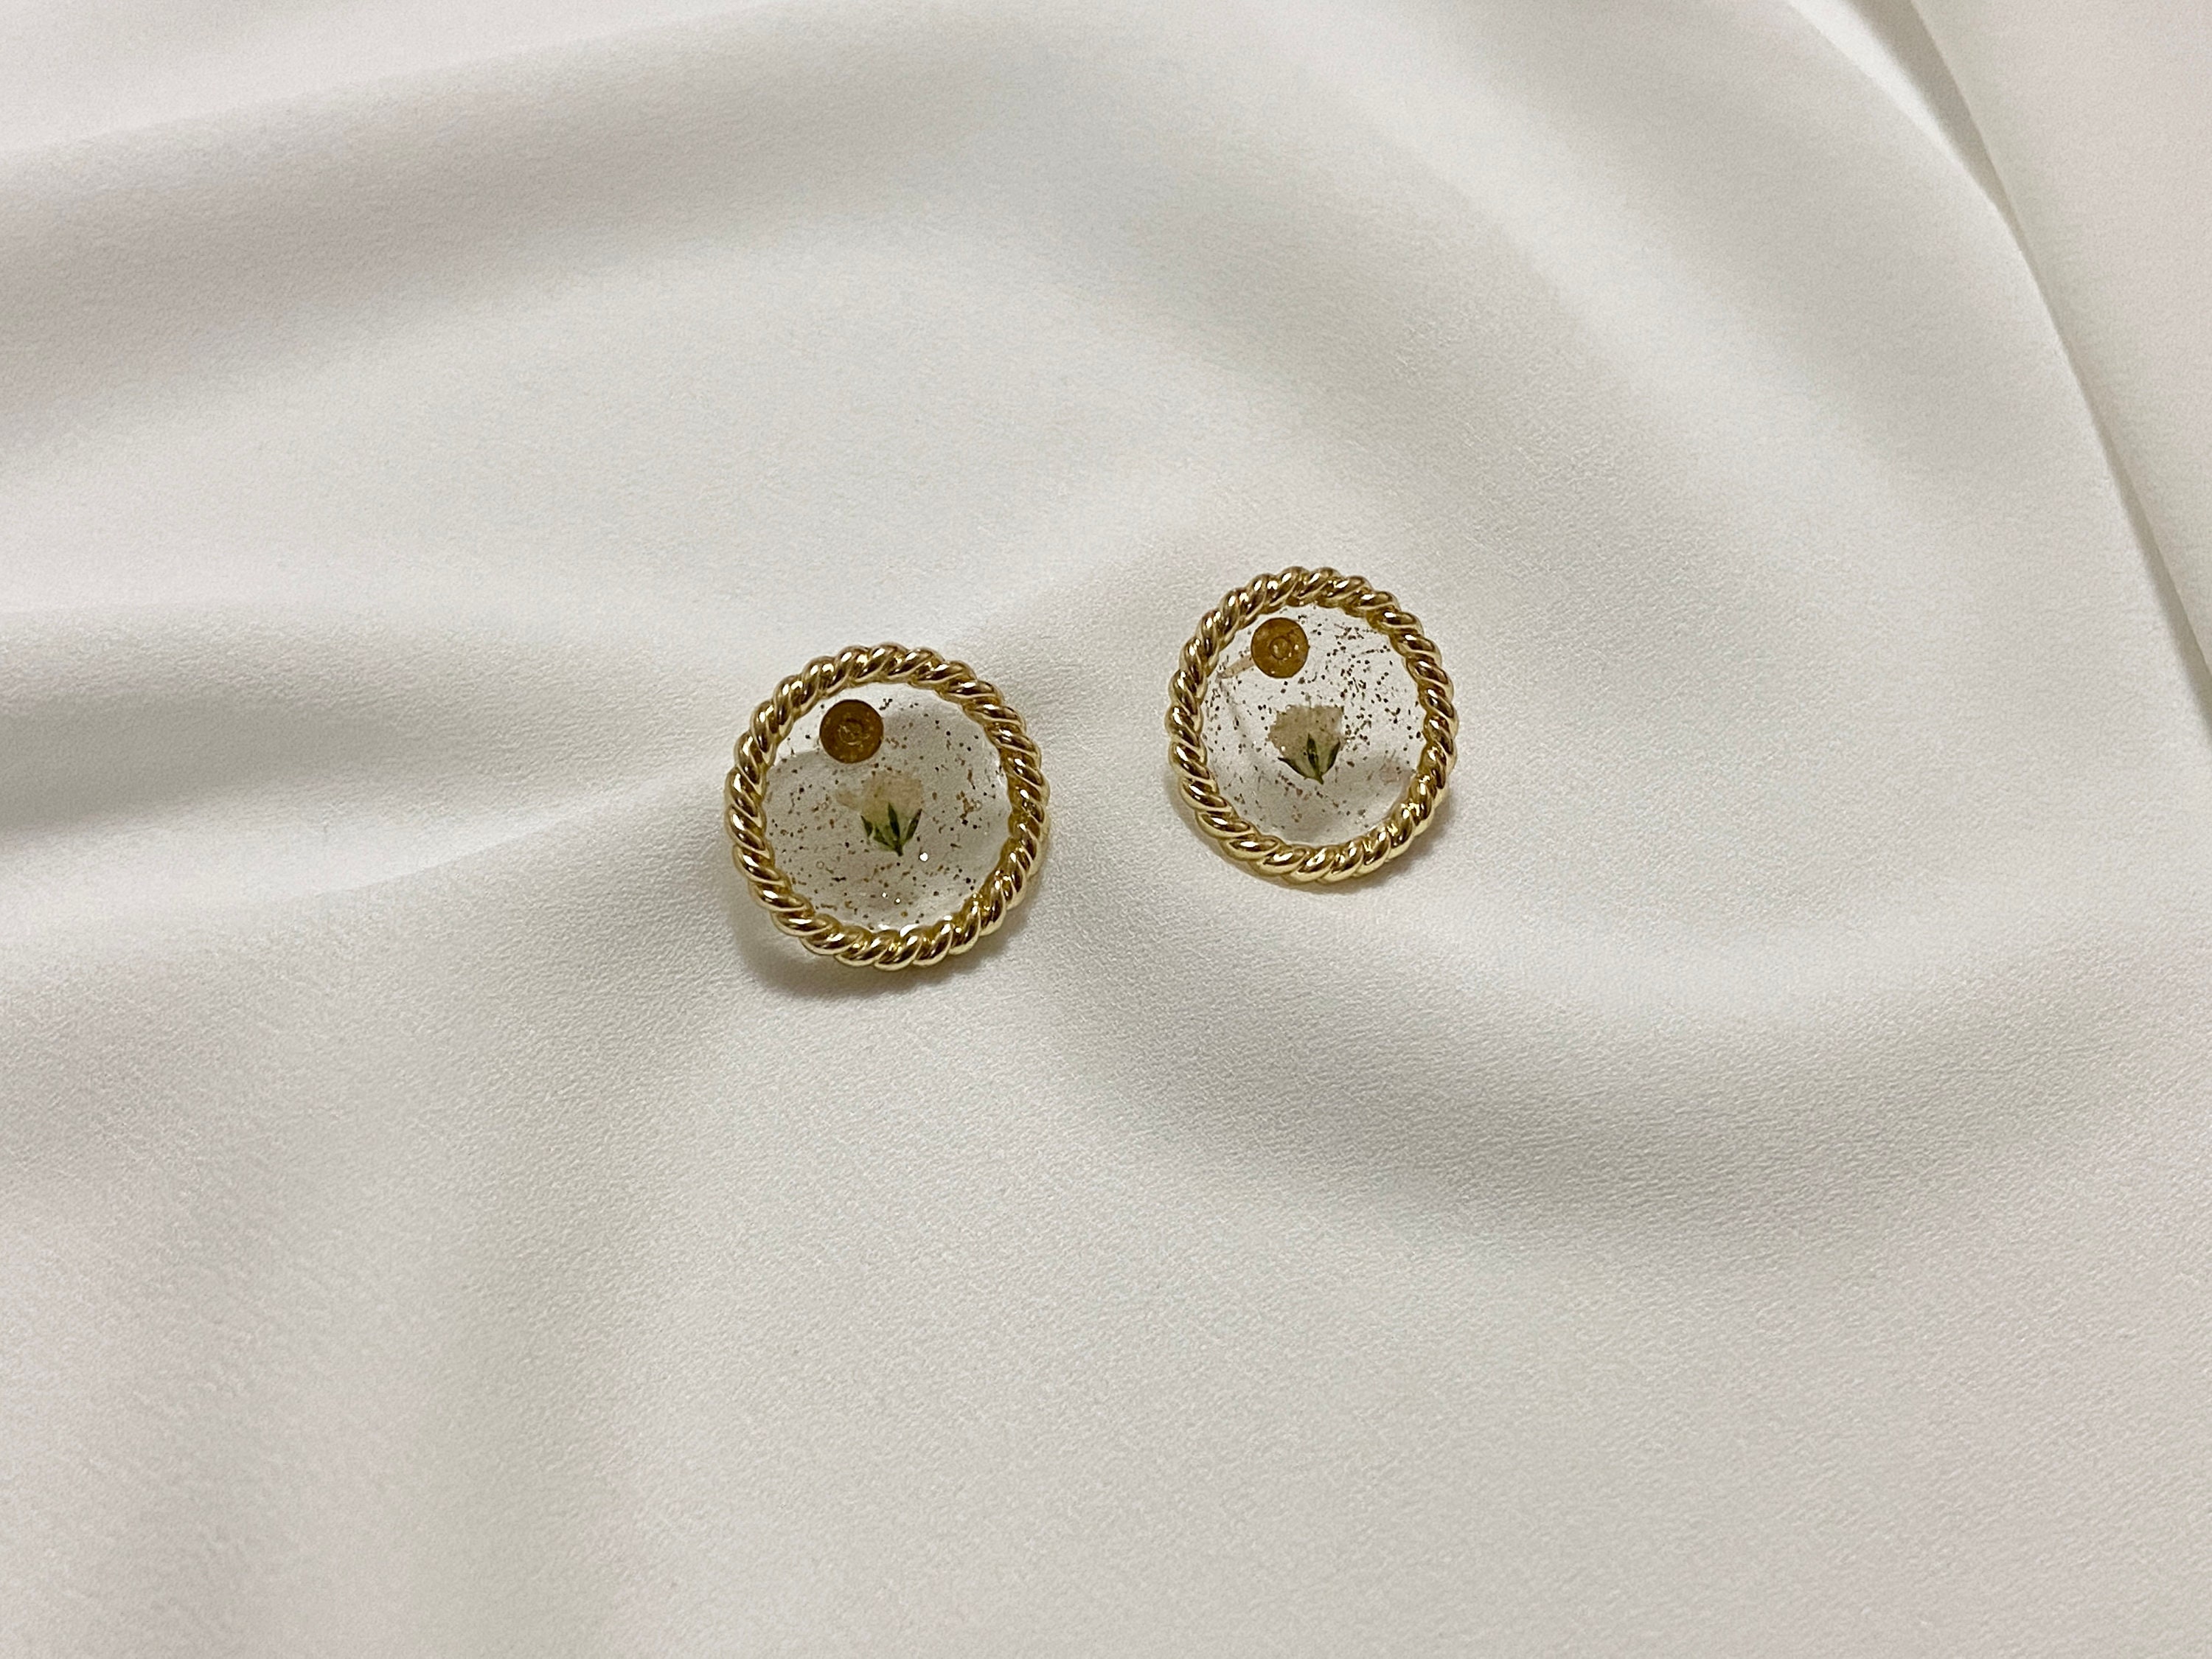 Gold Plated Gold Studs Circular Studs with Real Dried | Etsy